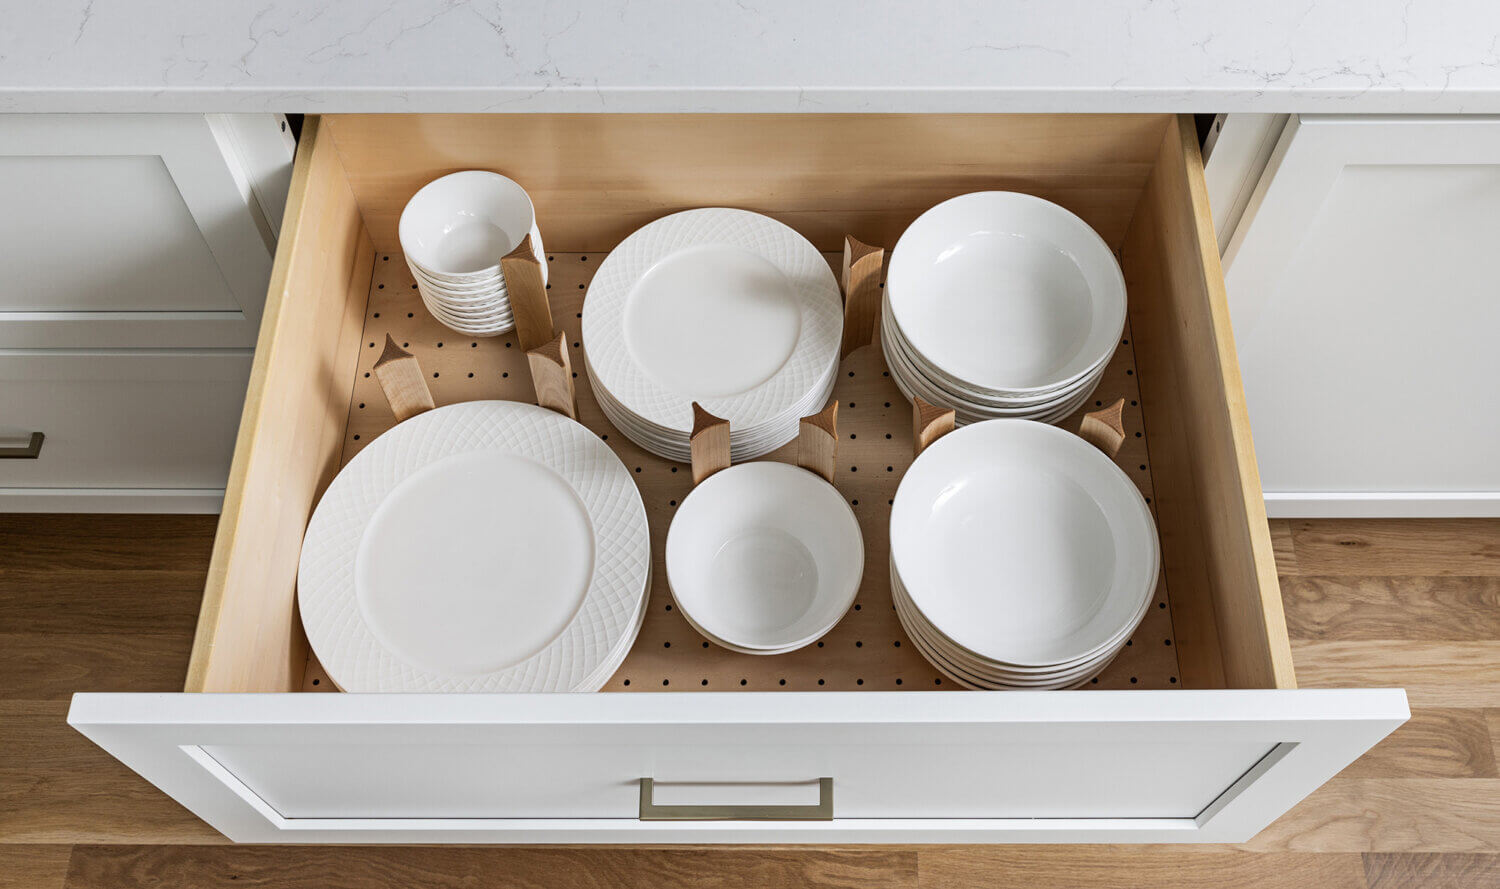 A deep drawer with a dish rack drawer for plates and bowls.